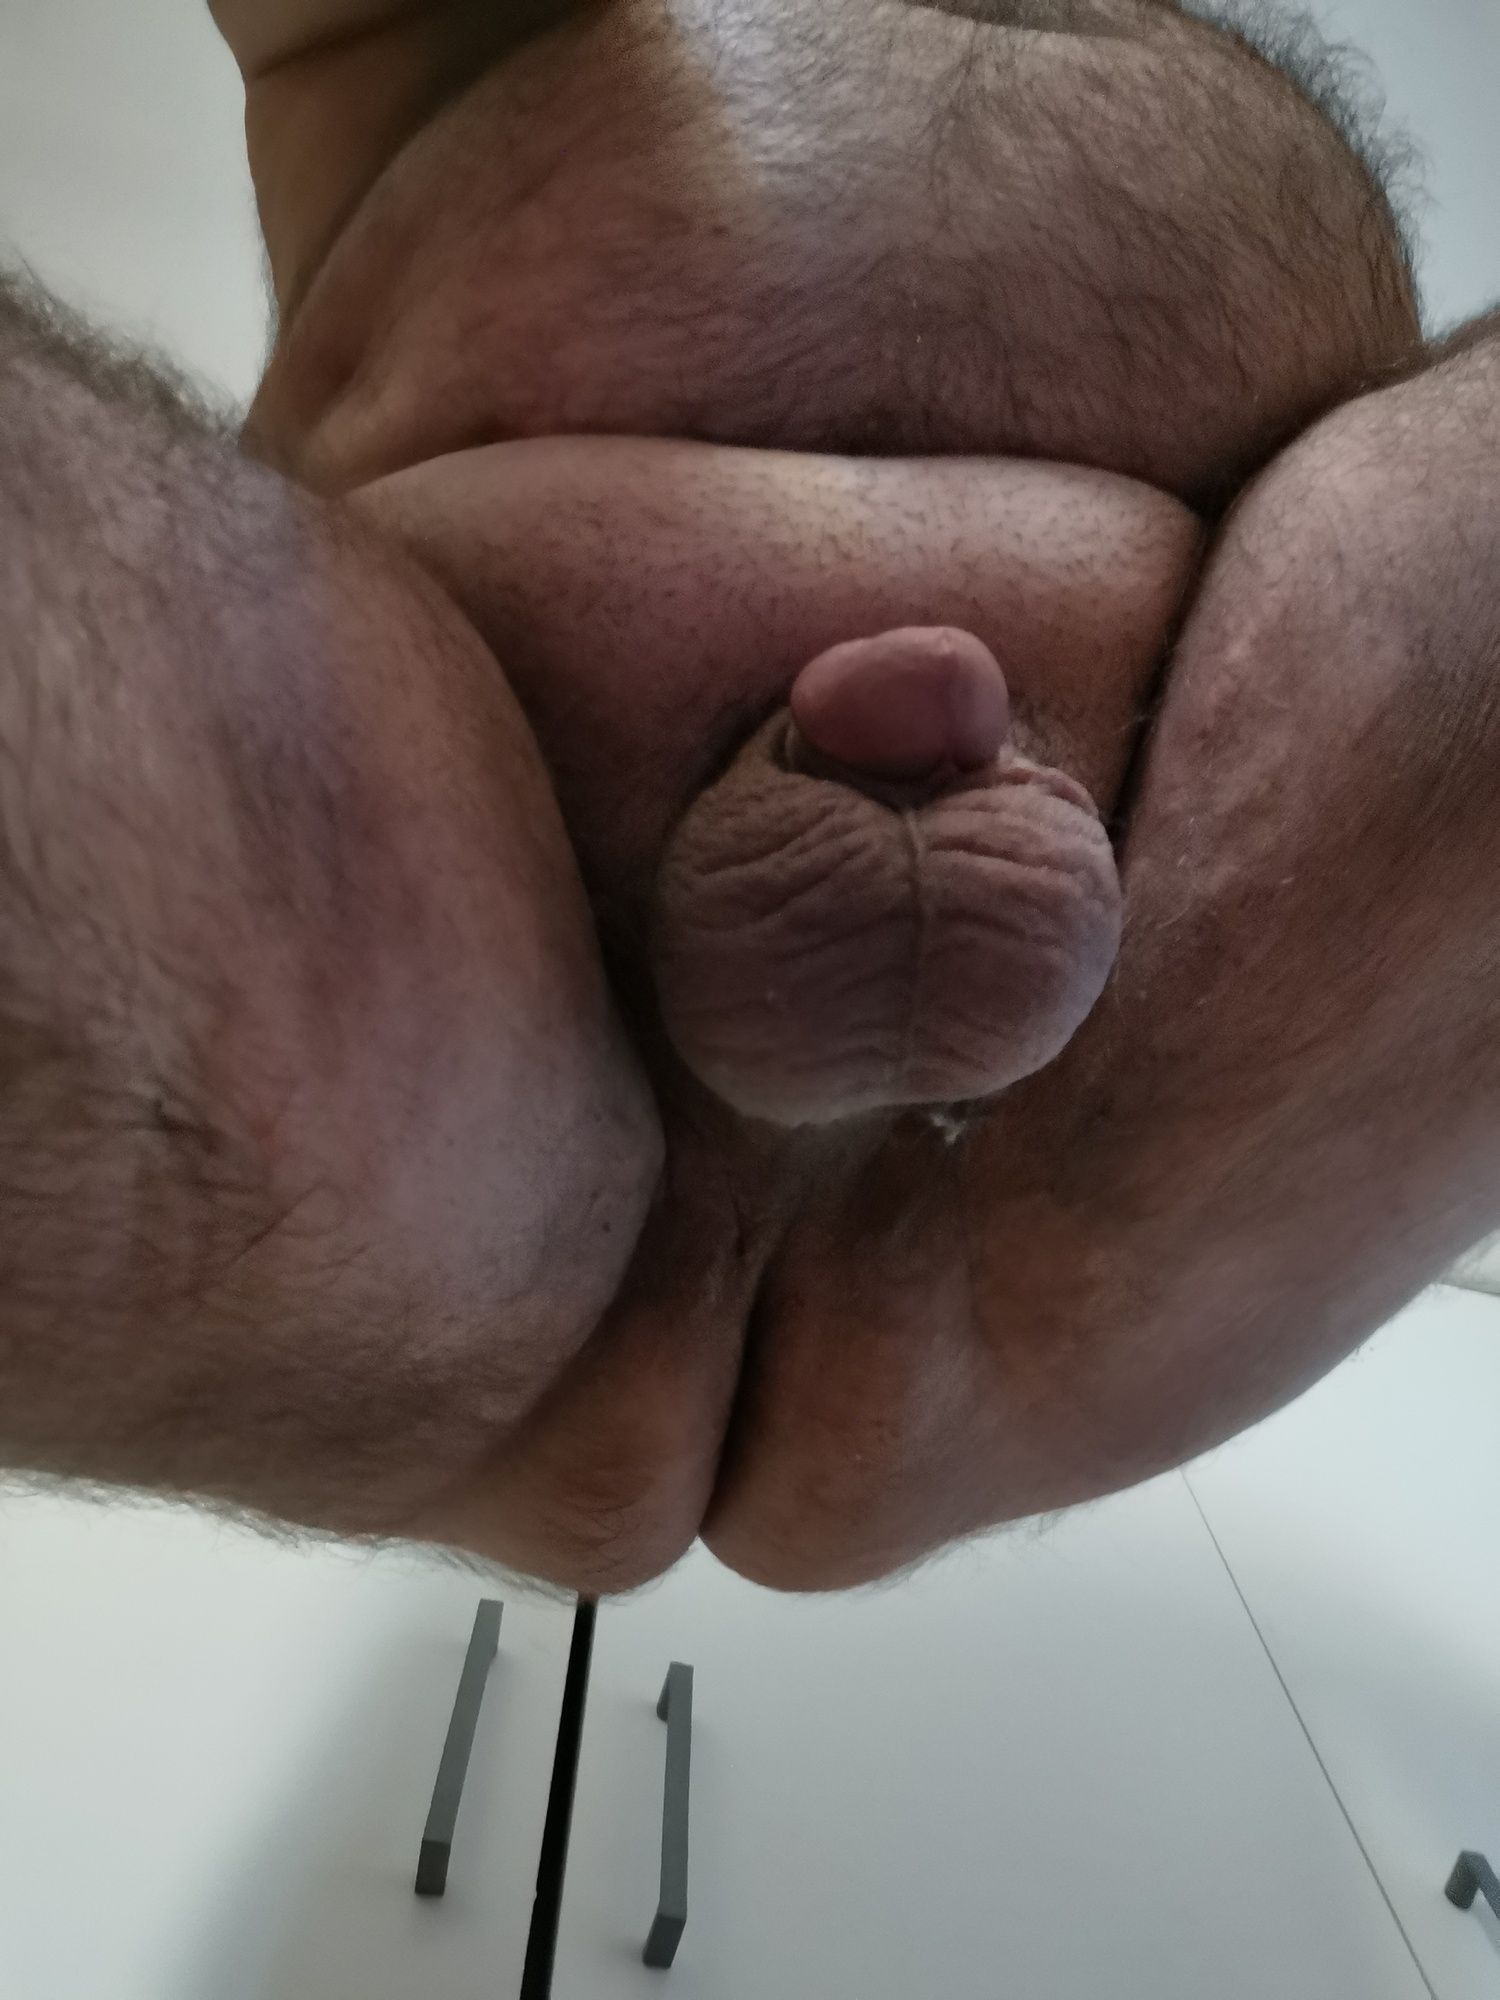 My small dick and ass 3 #9